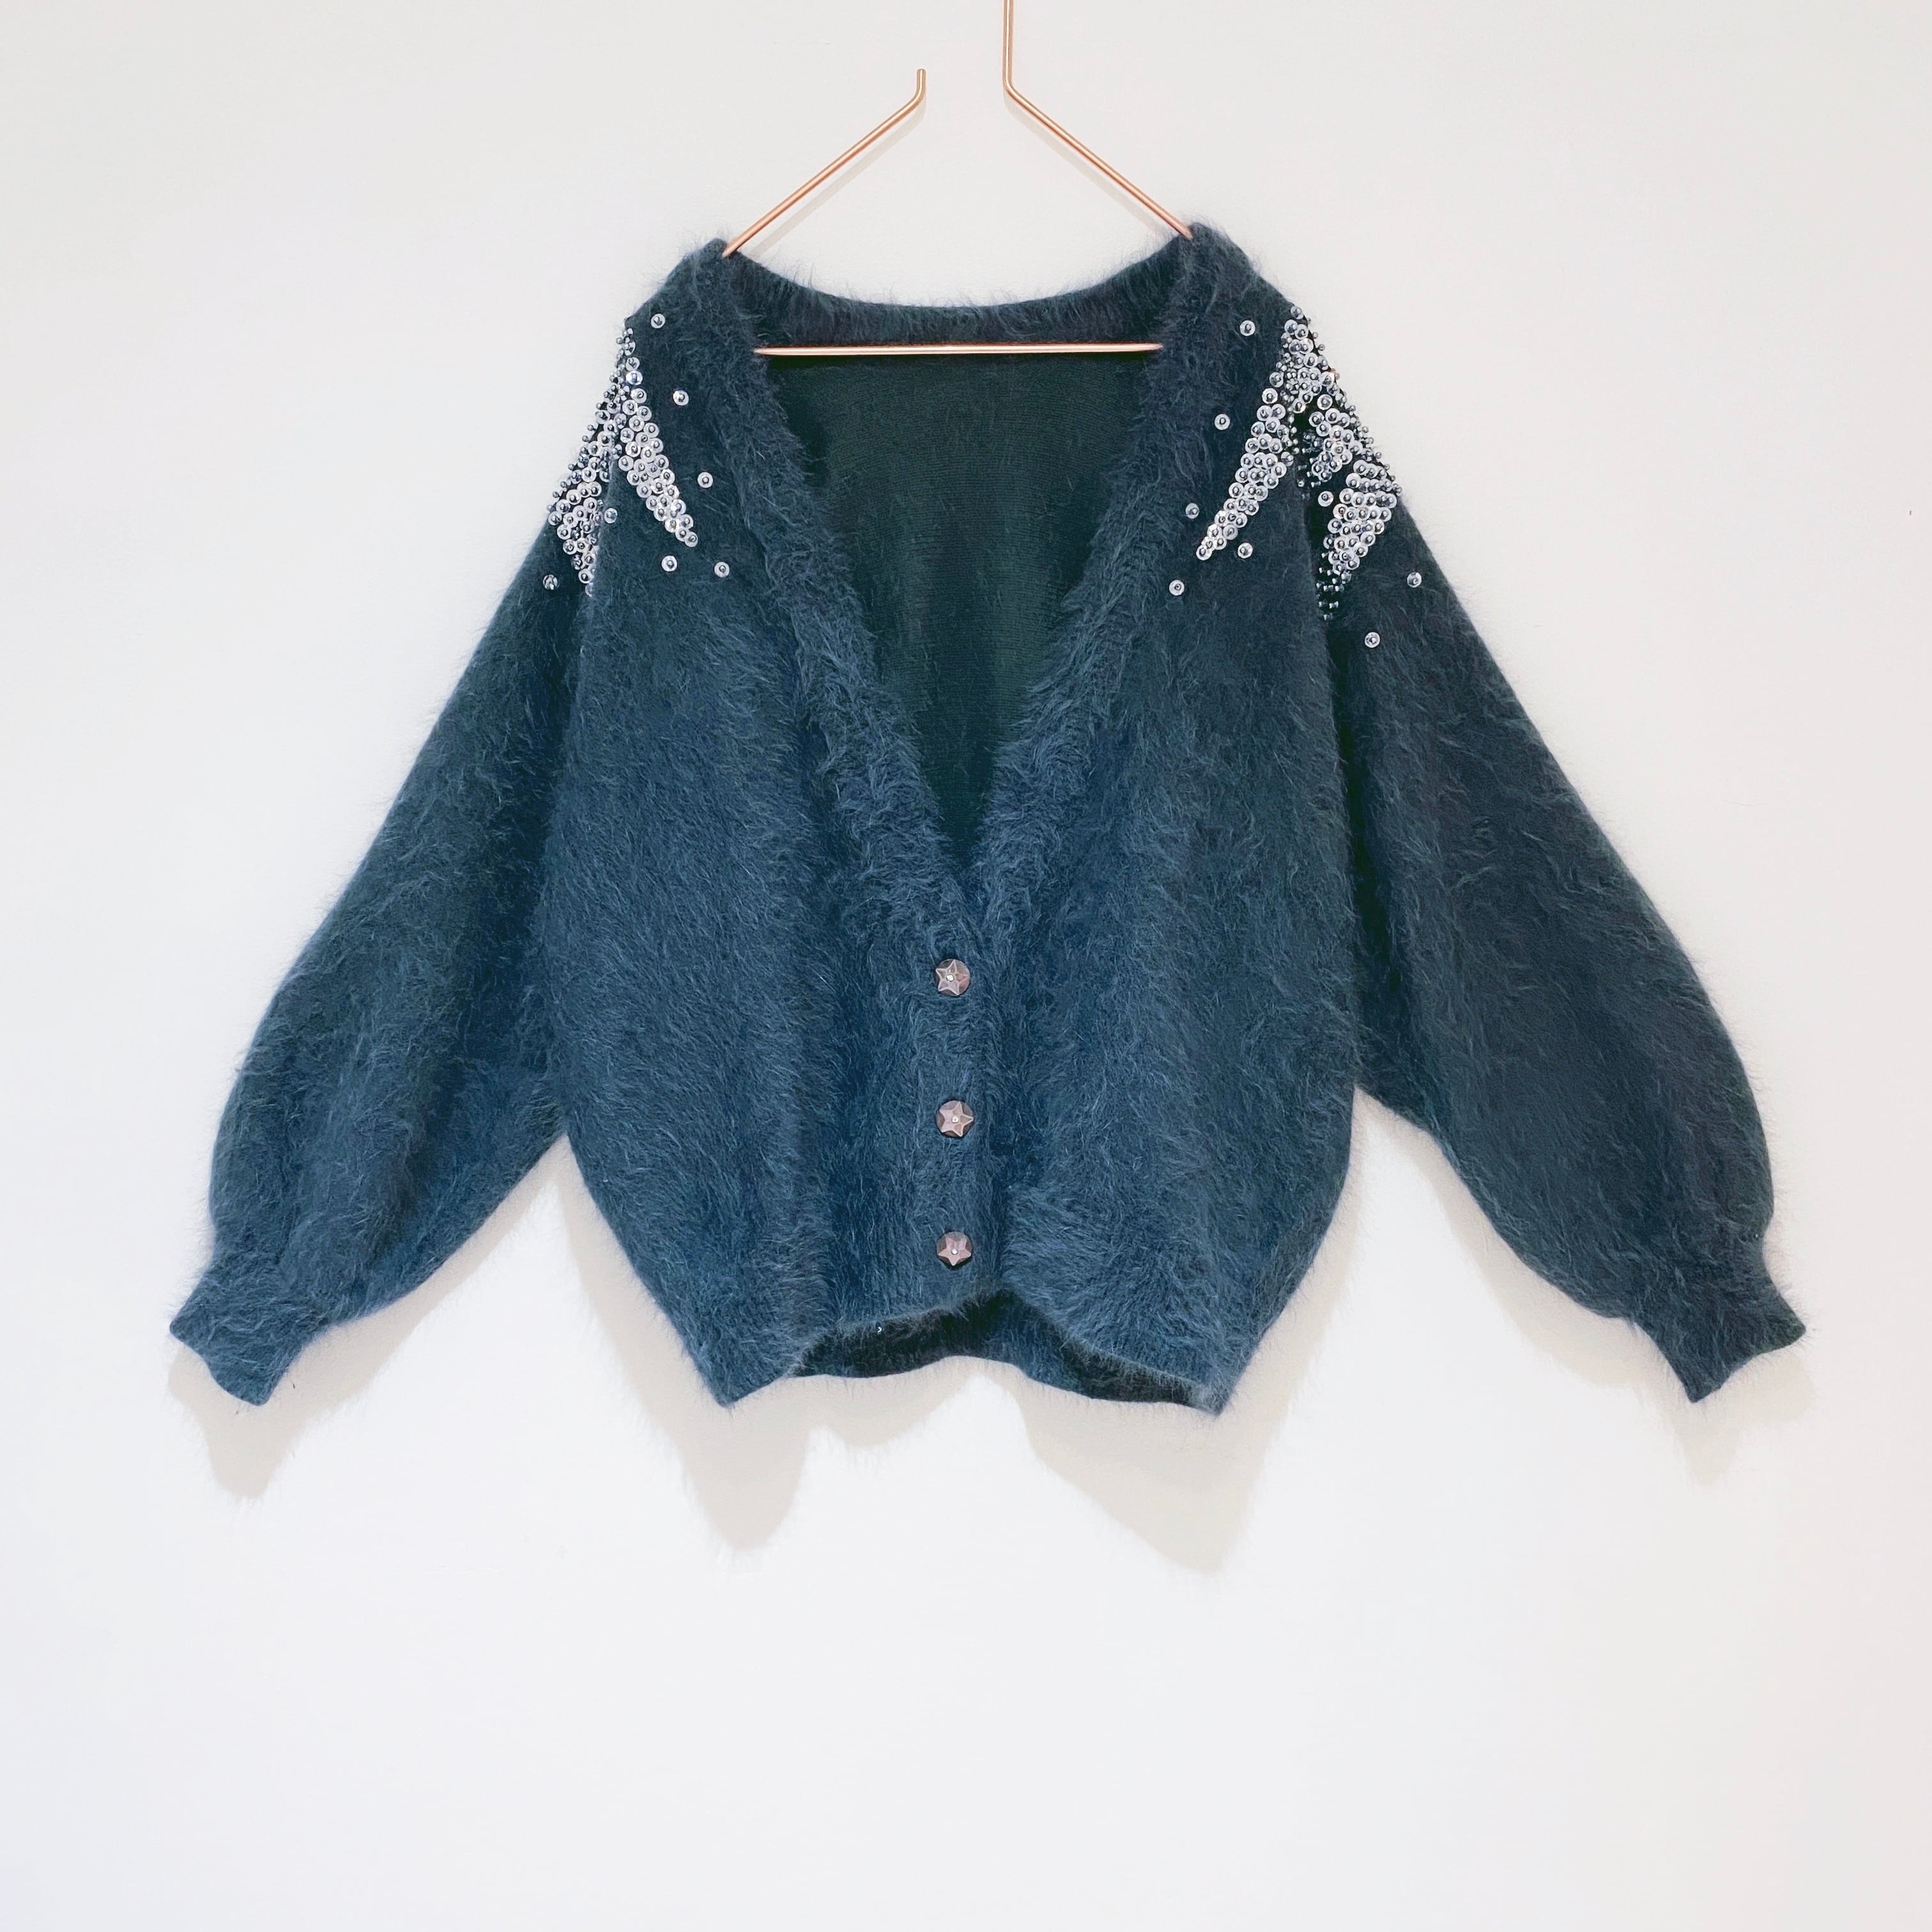 80s vintage sequined angora knit cardigan from U.S.A.◼︎ | The